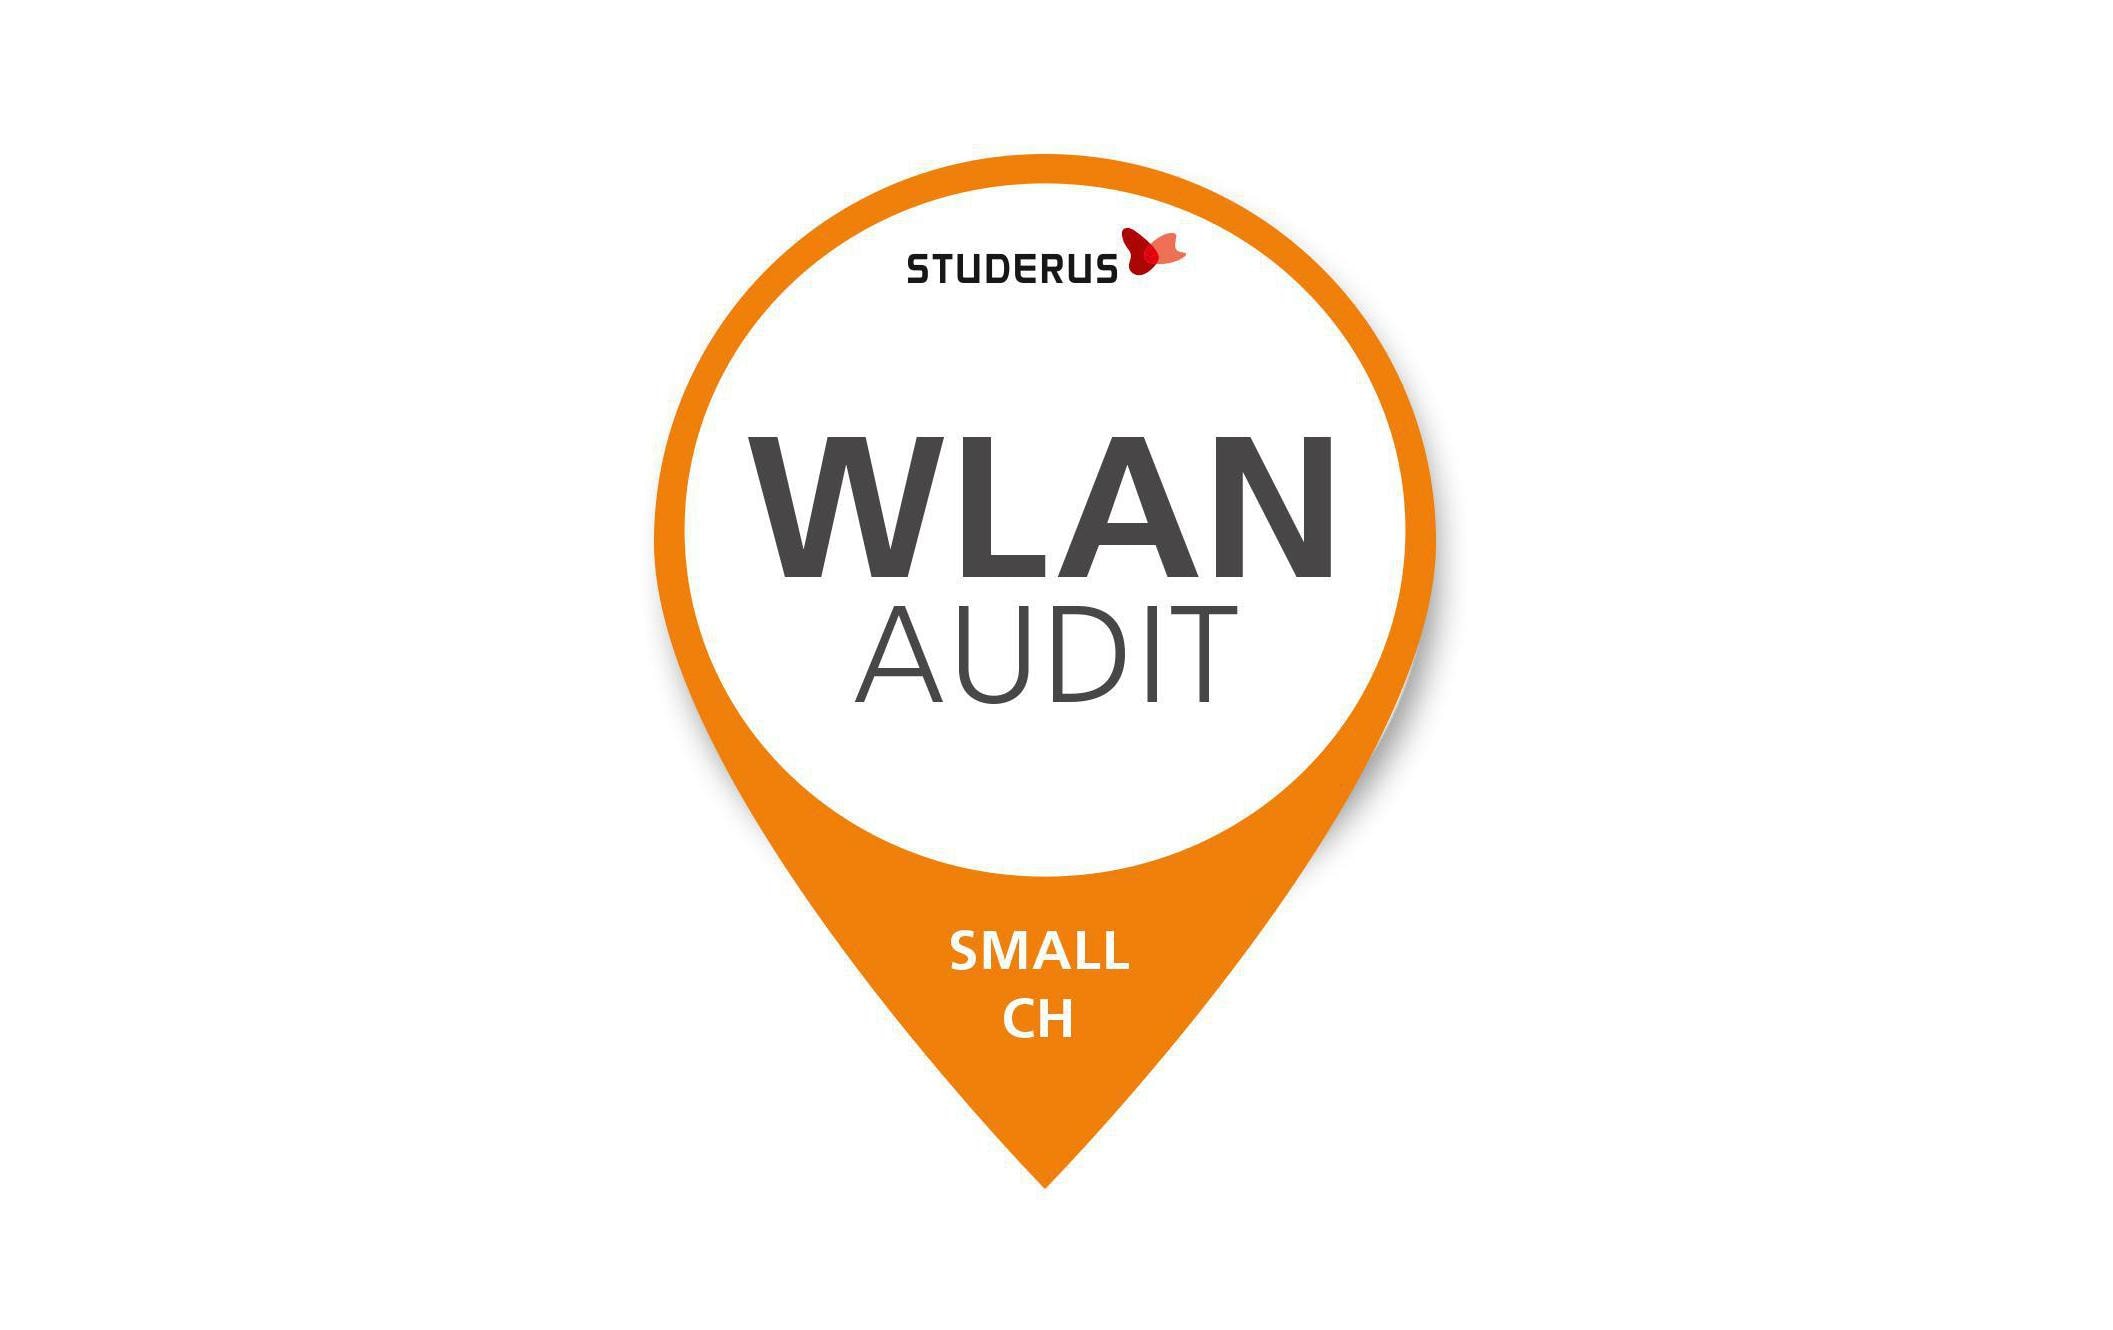 Zyxel Studerus WLAN Audit Small CH bis 2500m2, CH